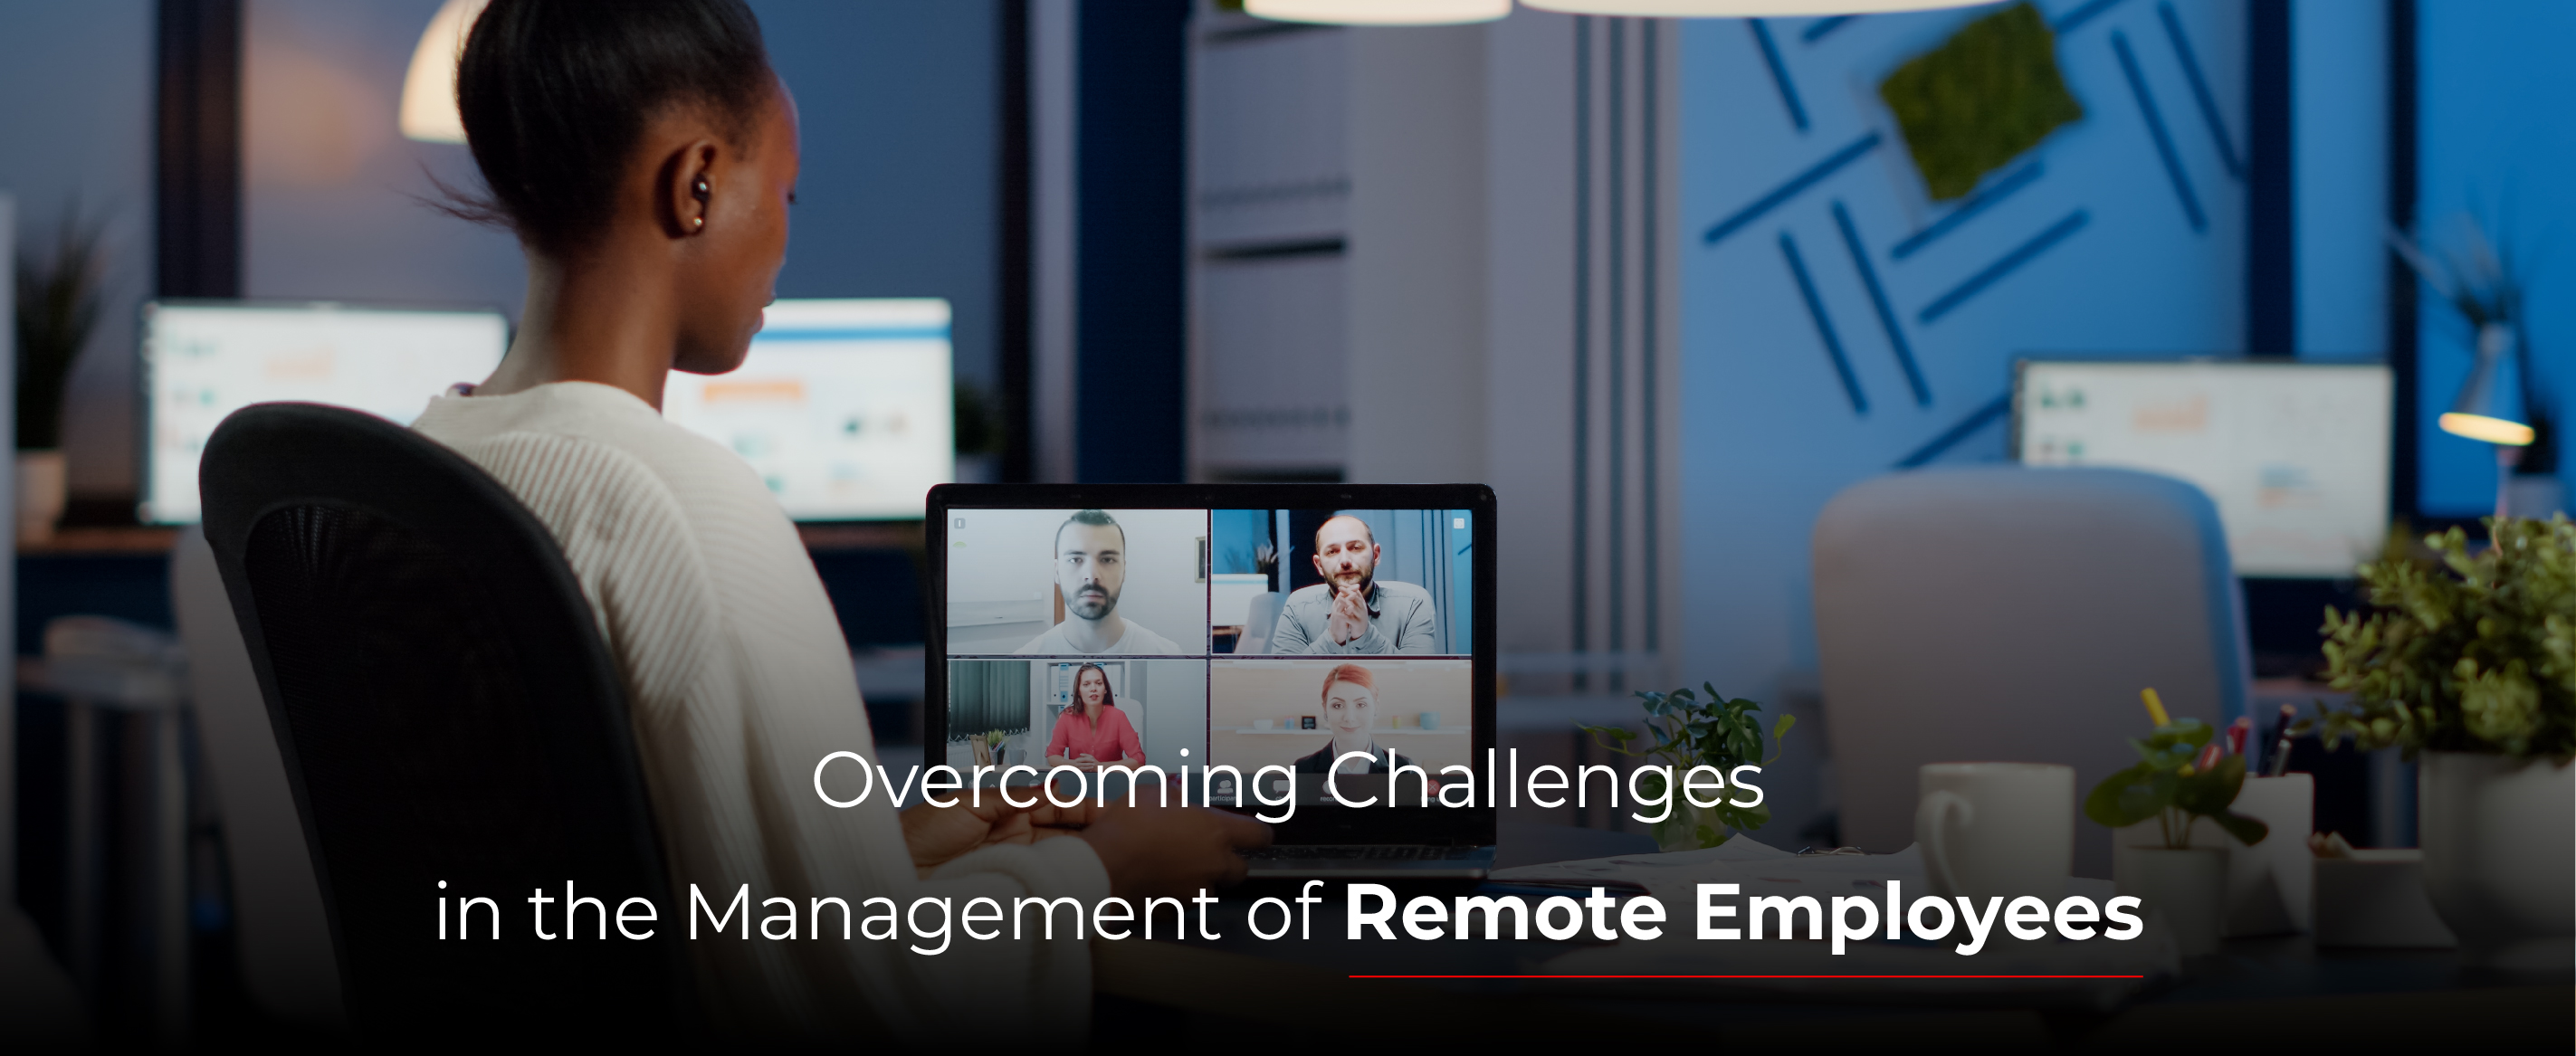 Overcoming Challenges in the Management of Remote Employees